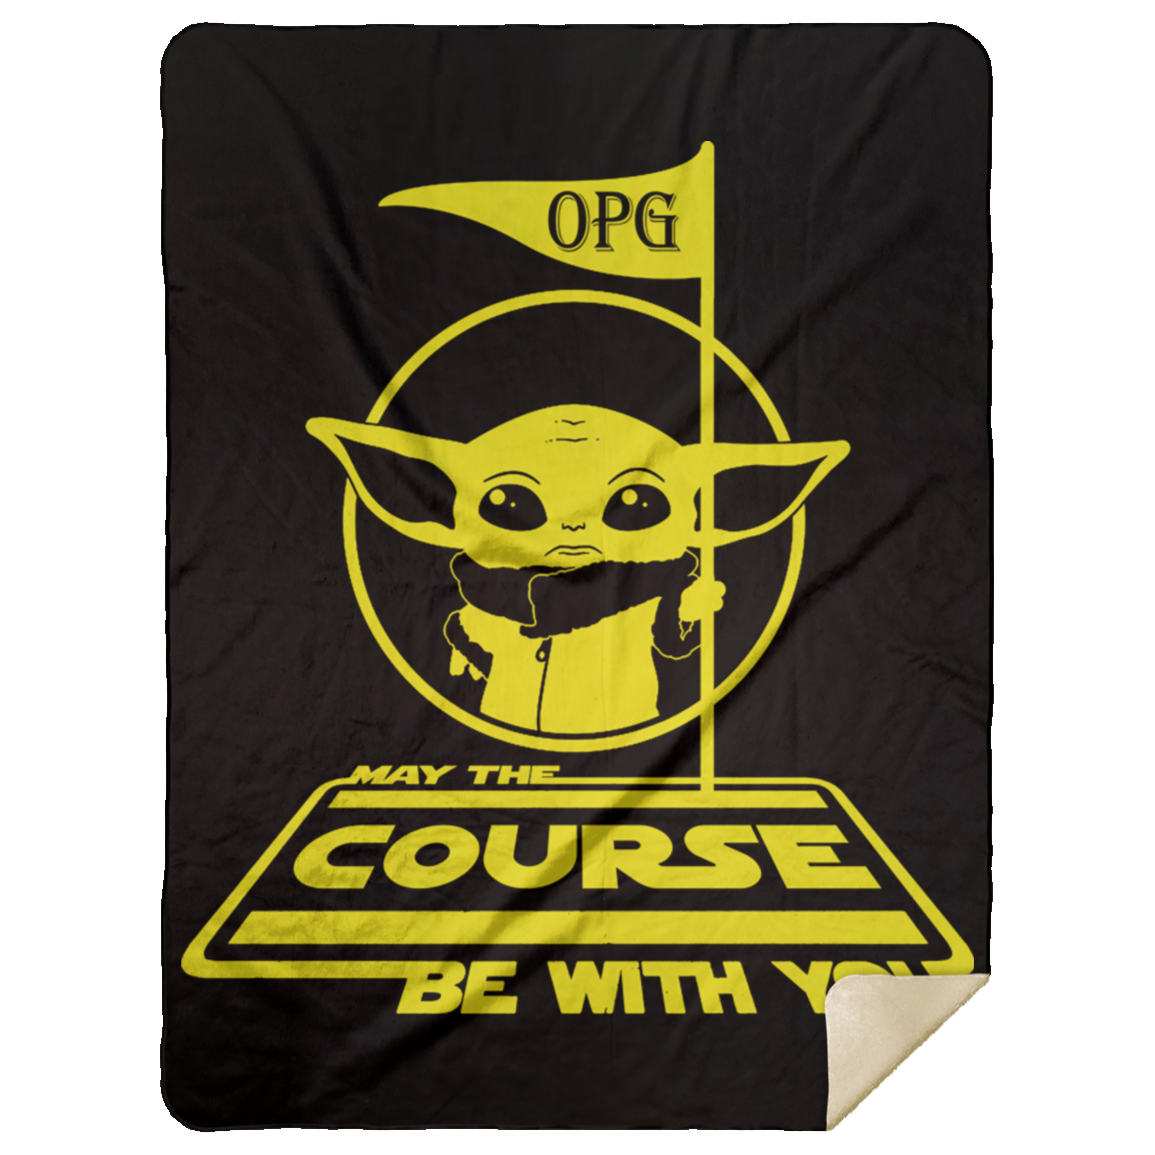 OPG Custom Design #21. May The Course Be With You. Fan Art. Premium Mink Sherpa Blanket 60x80